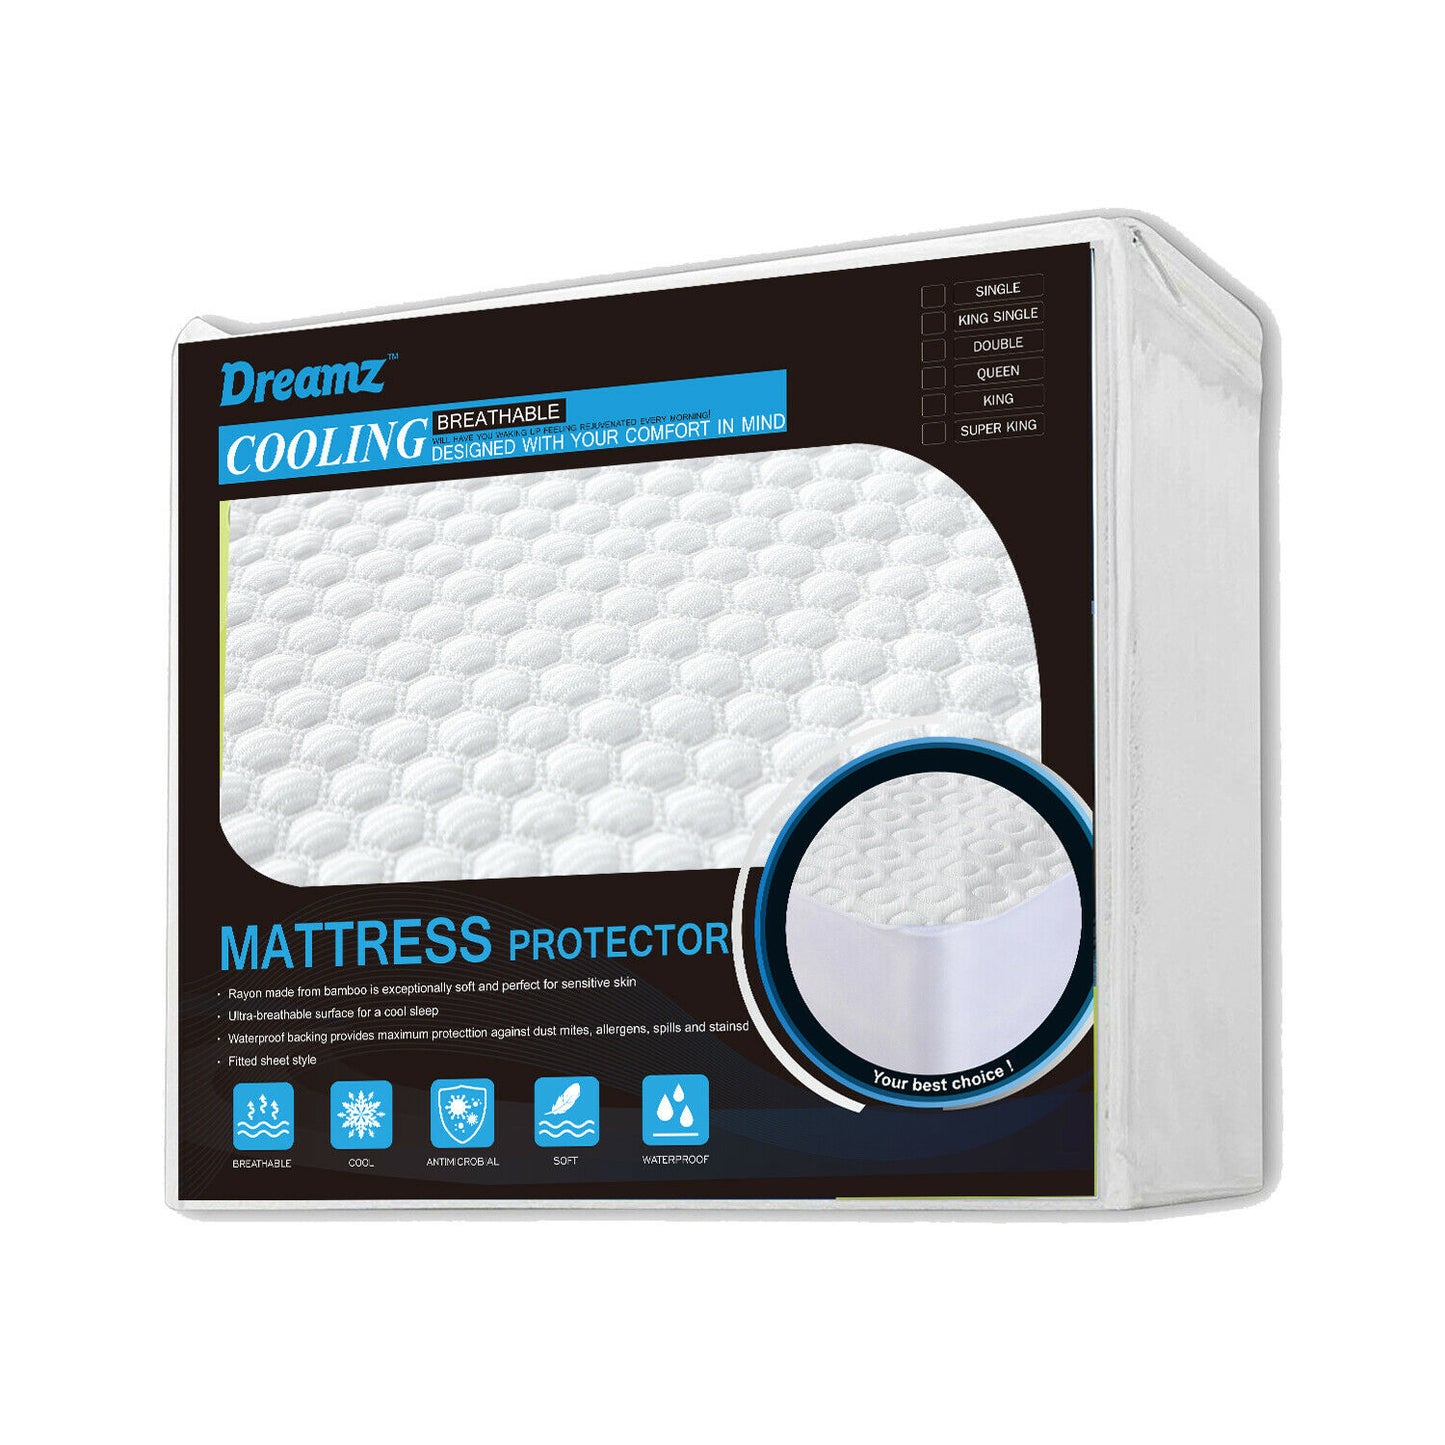 Mattress Protector Topper Polyester Cool Fitted Cover Waterproof Double - image2